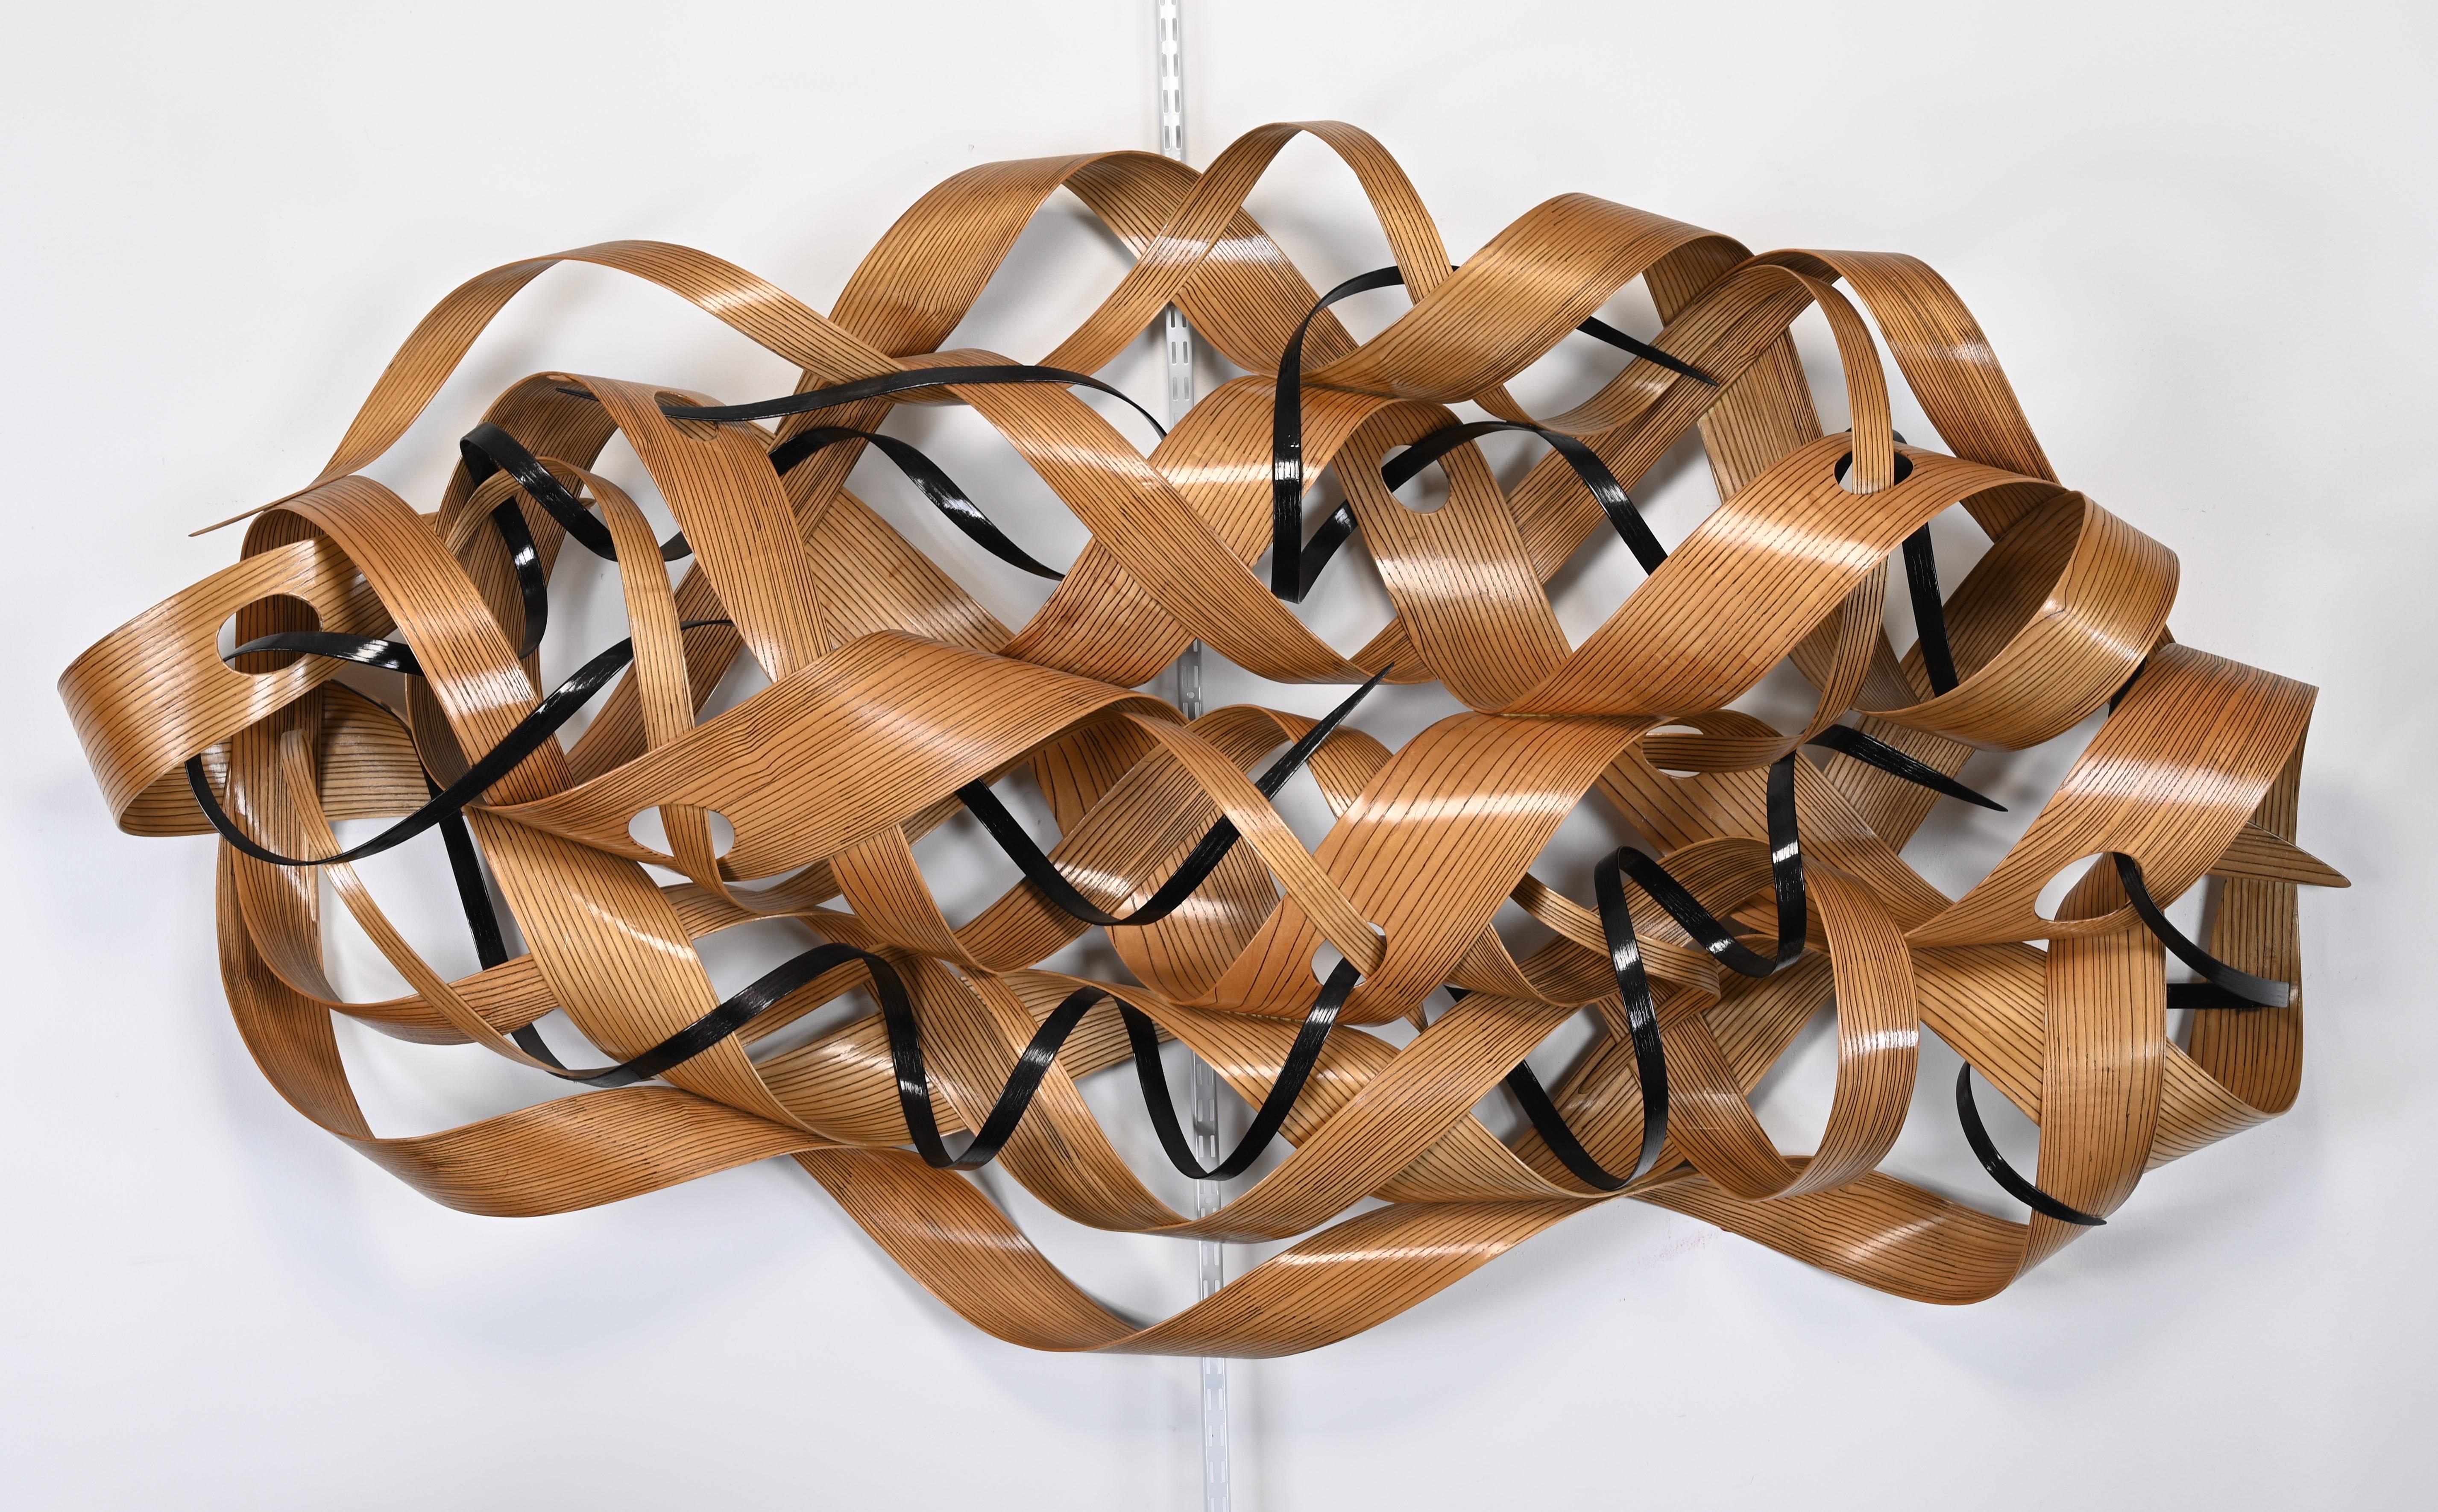 A unique freeform steam-bent wall sculpture made of oak by Renee Dinauer. Her love for constructionism as sculpture and architecture is her inspiration for this unique wall sculpture. Her work is displayed in hotels, corporations, and private